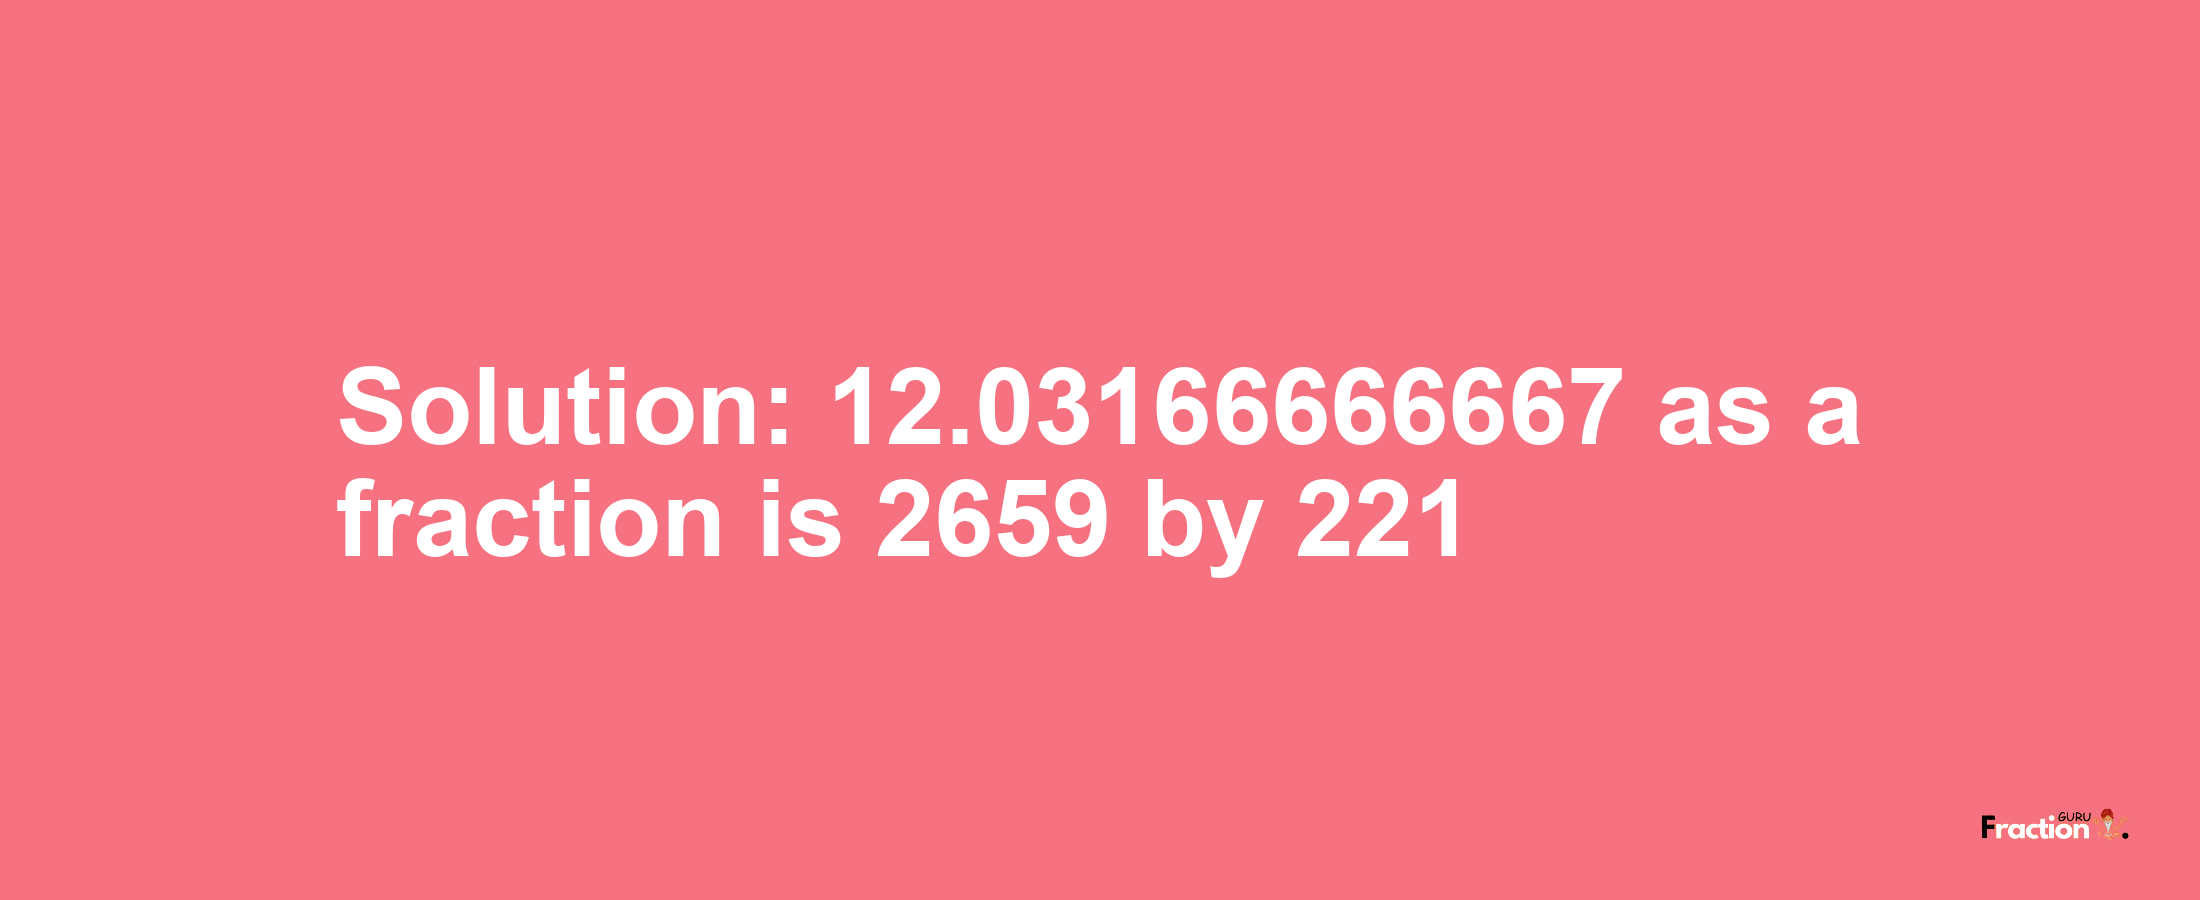 Solution:12.03166666667 as a fraction is 2659/221